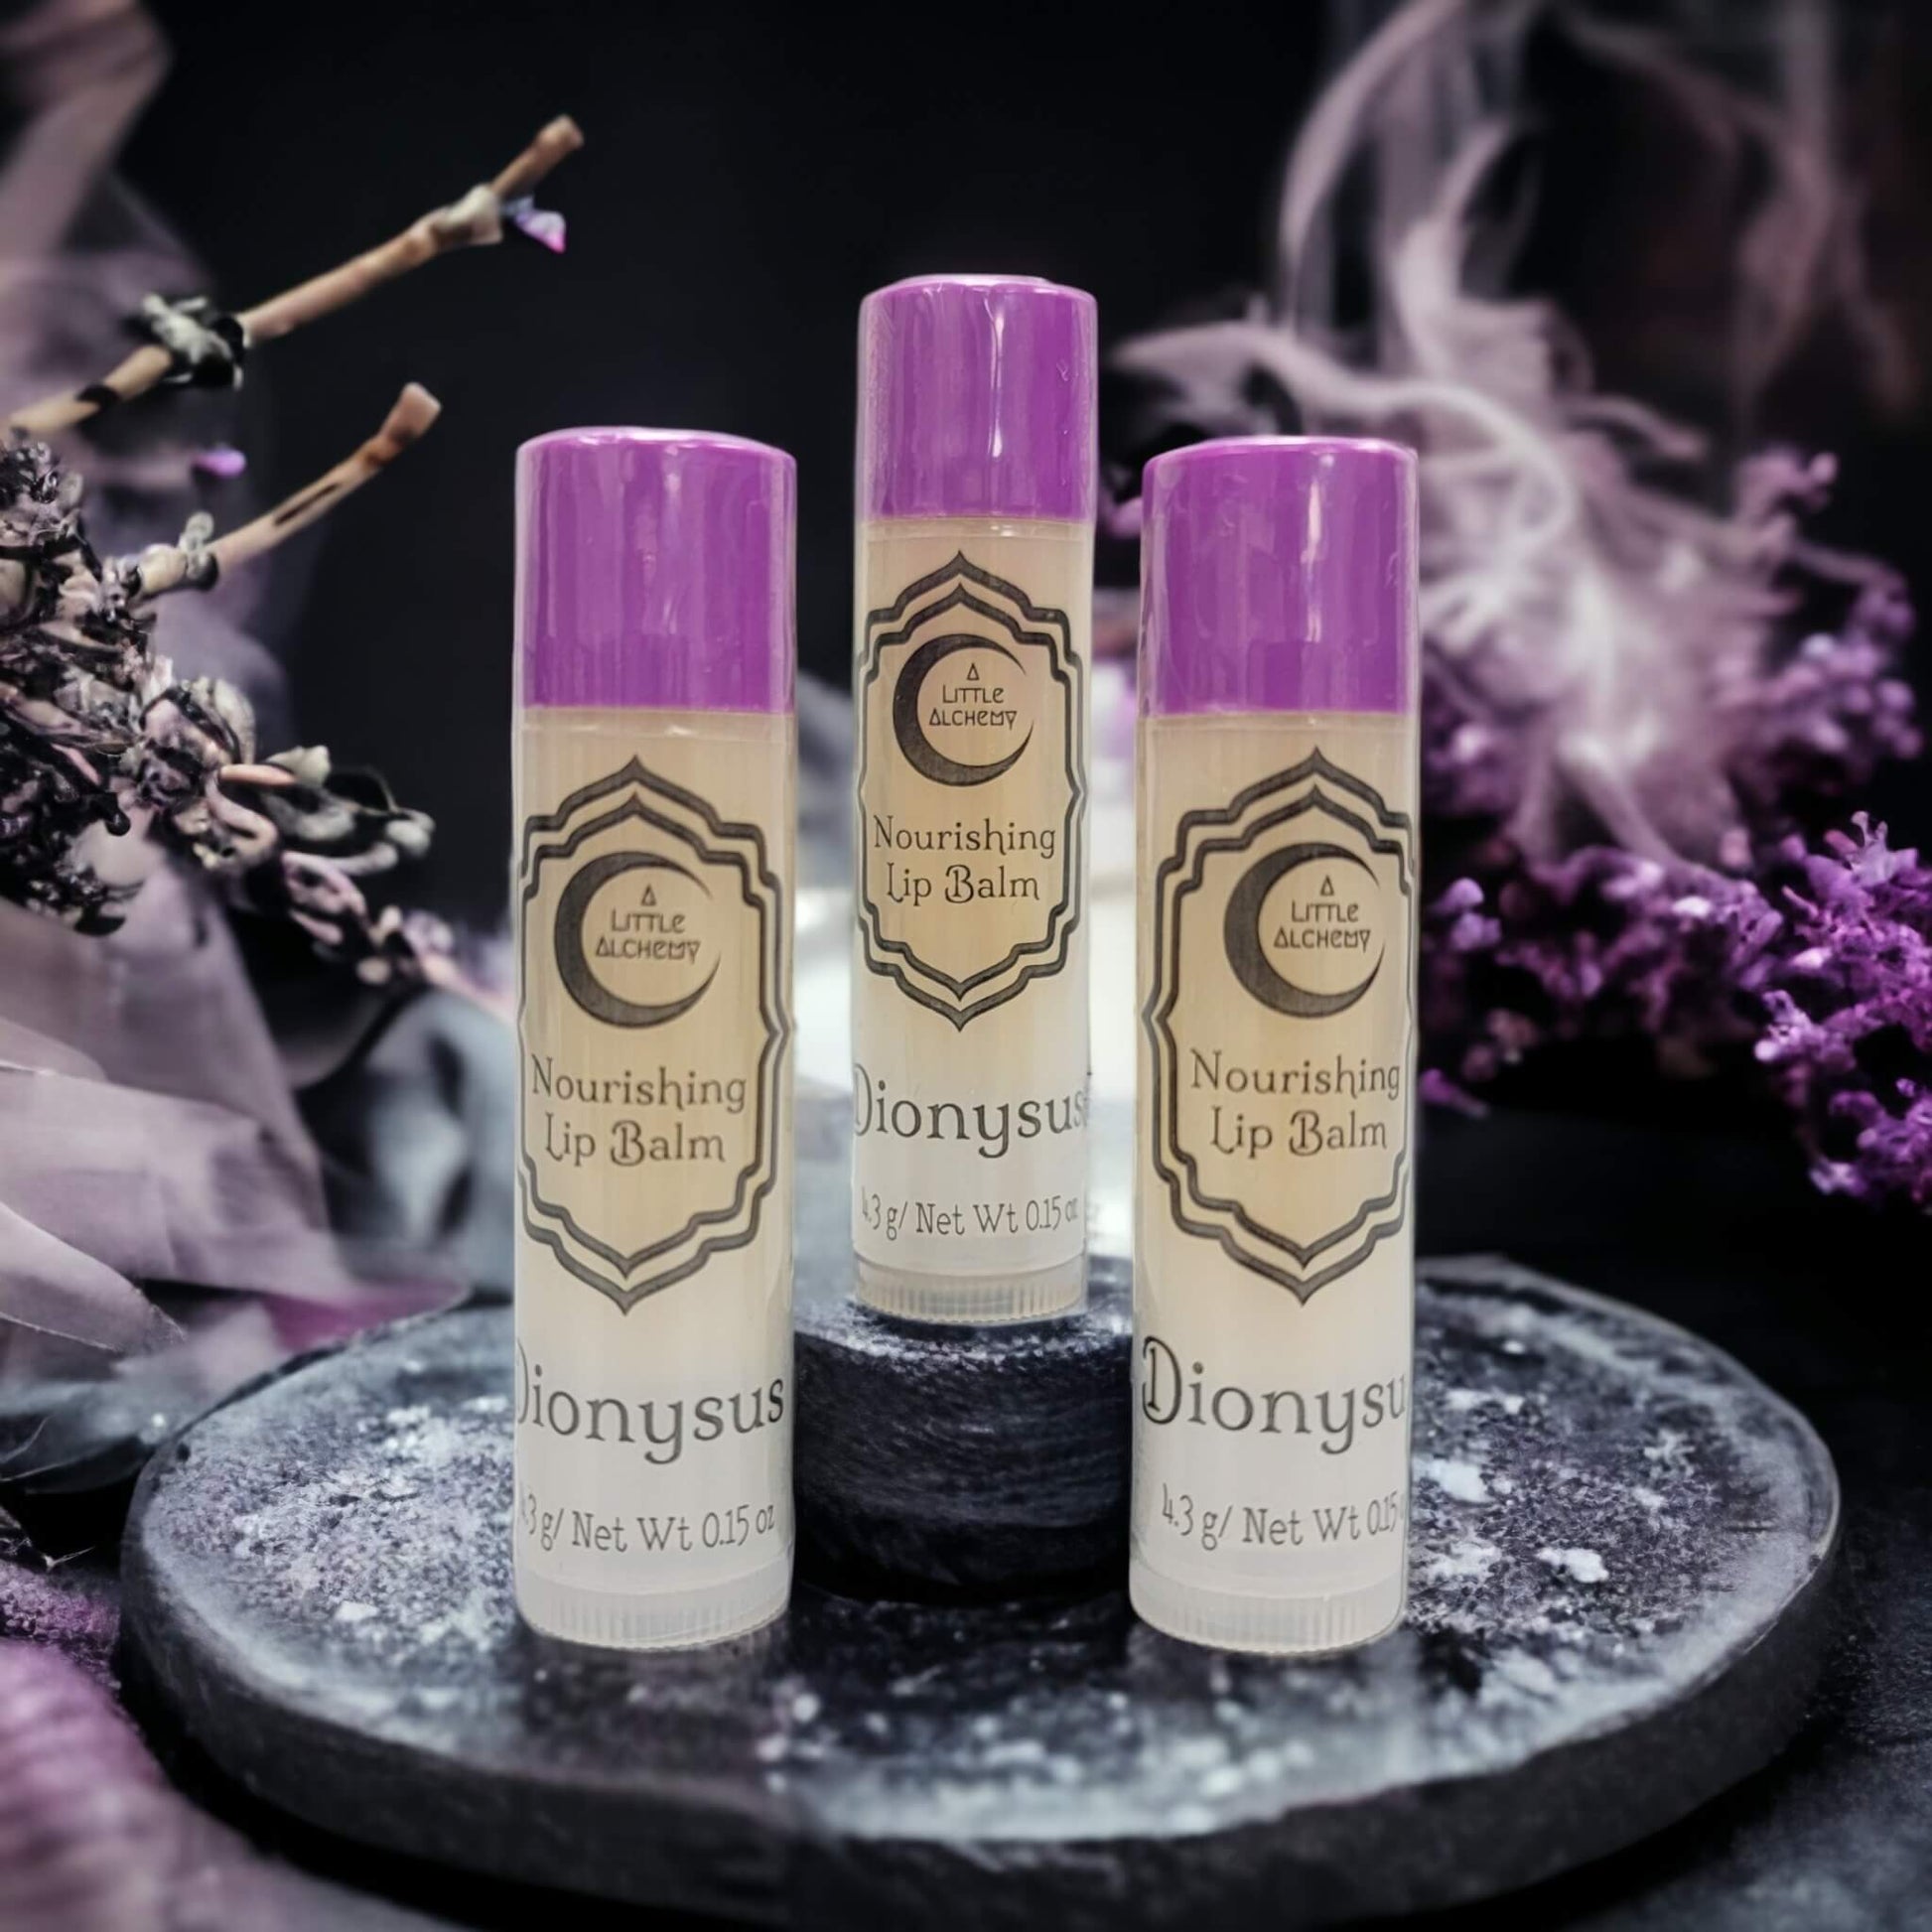 our nourishing lip balms in the flavor dionysus.